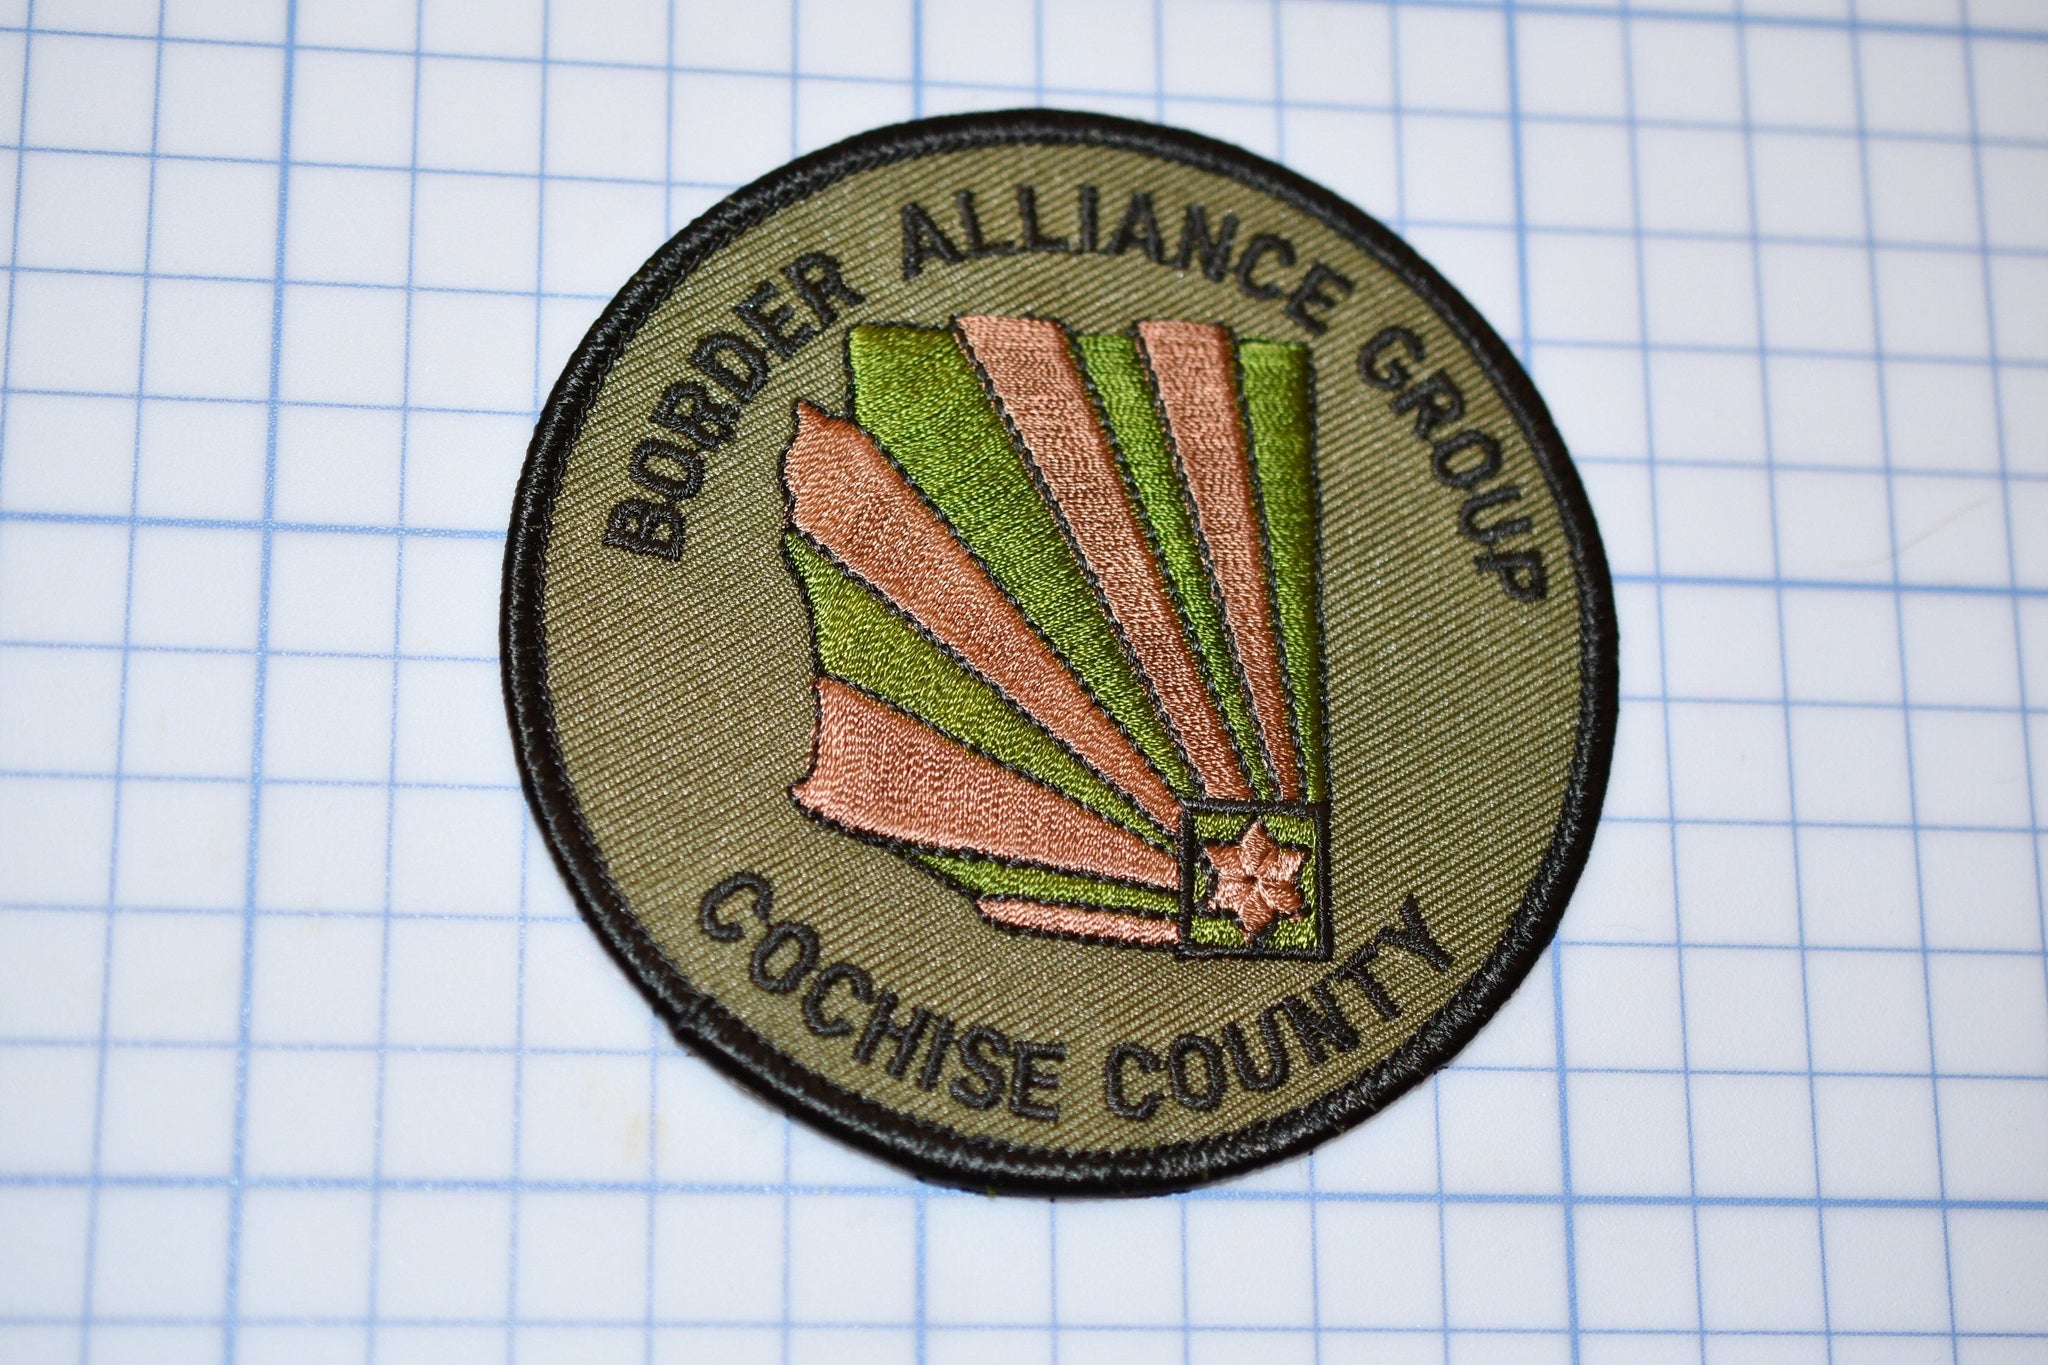 Cochise County Arizona Border Alliance Group Patch (Subdued) (S3-251)